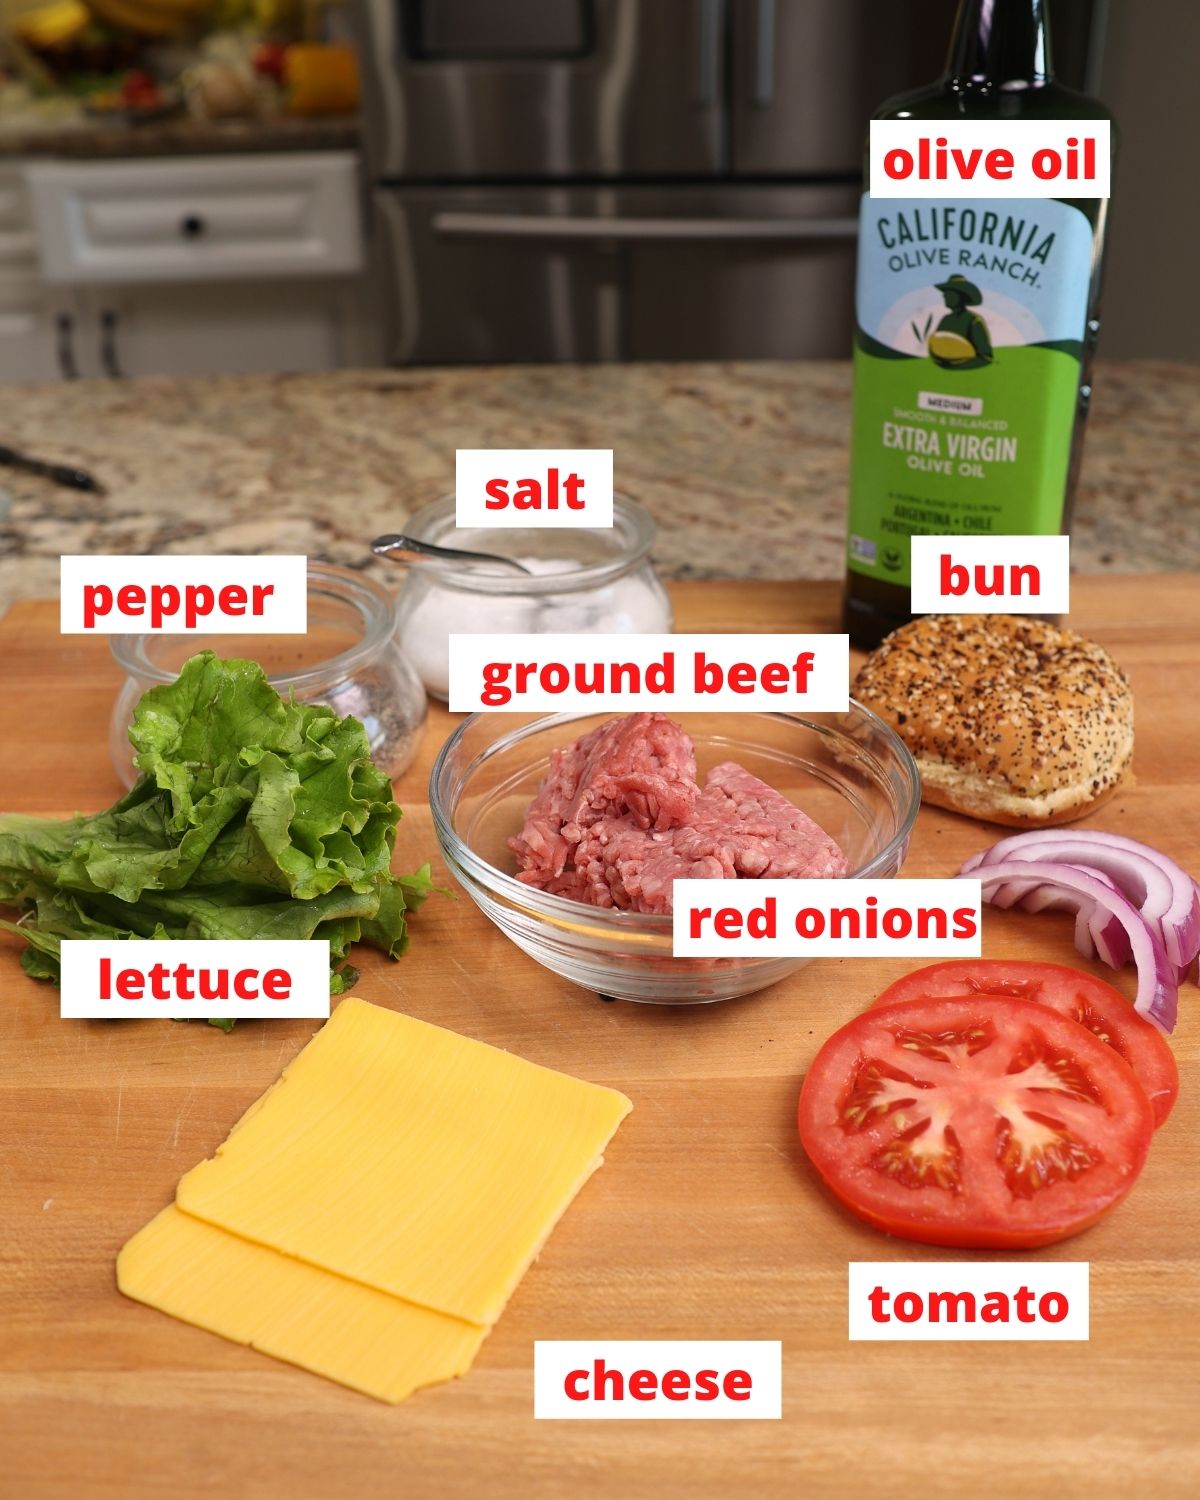 ingredients to make a hamburger on a cutting board; ground beef, cheese, lettuce, tomatoes, and onions.